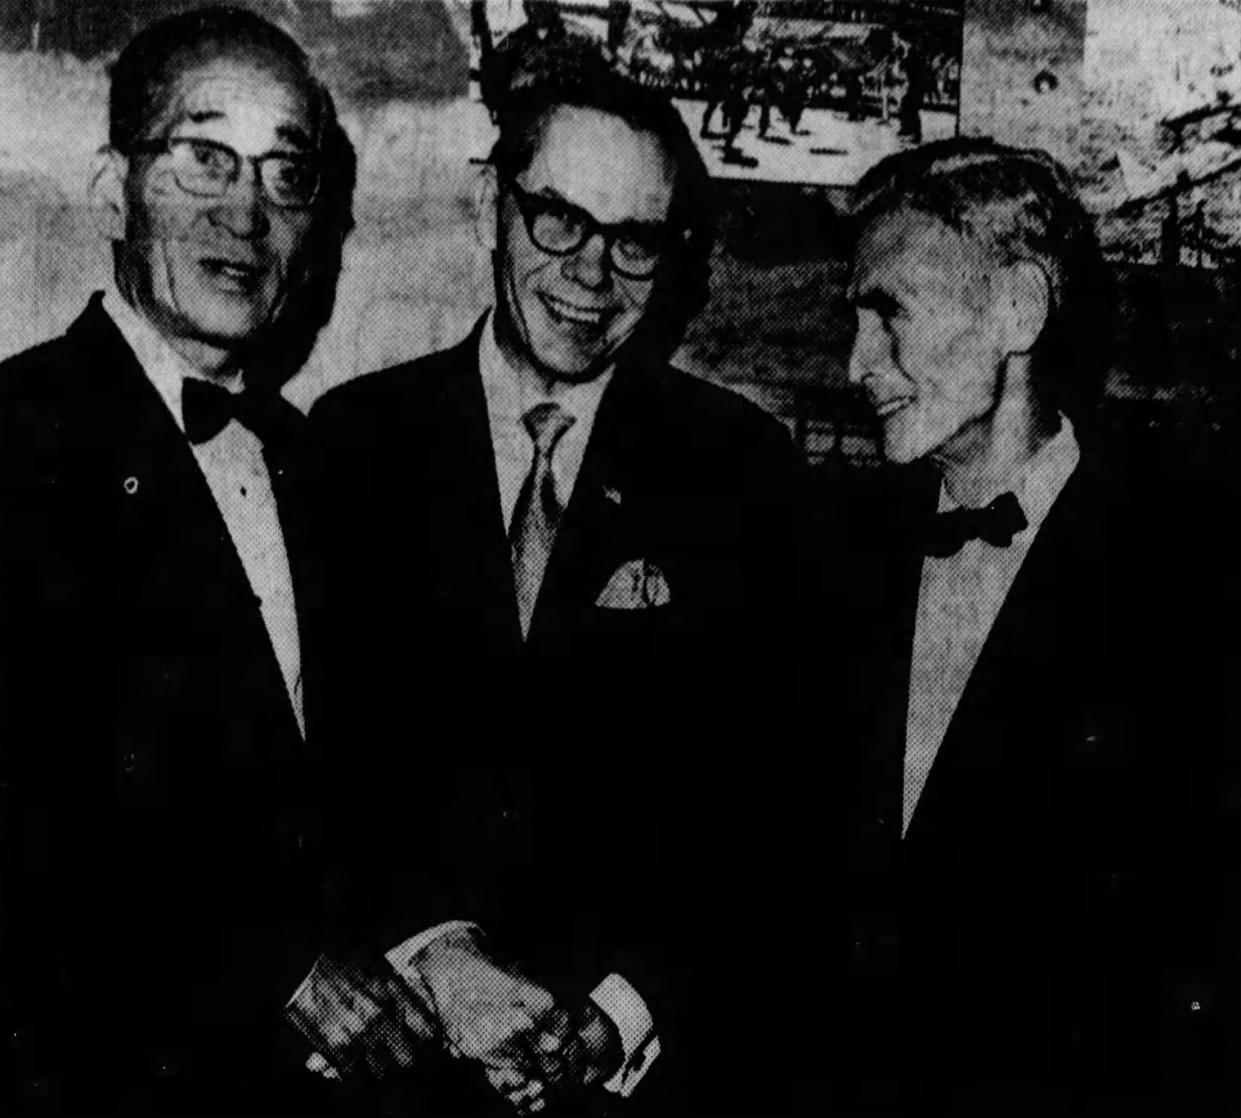 In December 1970 George Elliott, then a Long Branch resident, meets with two former Japanese commanders who helped lead the bombing of Pearl Harbor at the premiere of the movie "Tora! Tora! Tora!"